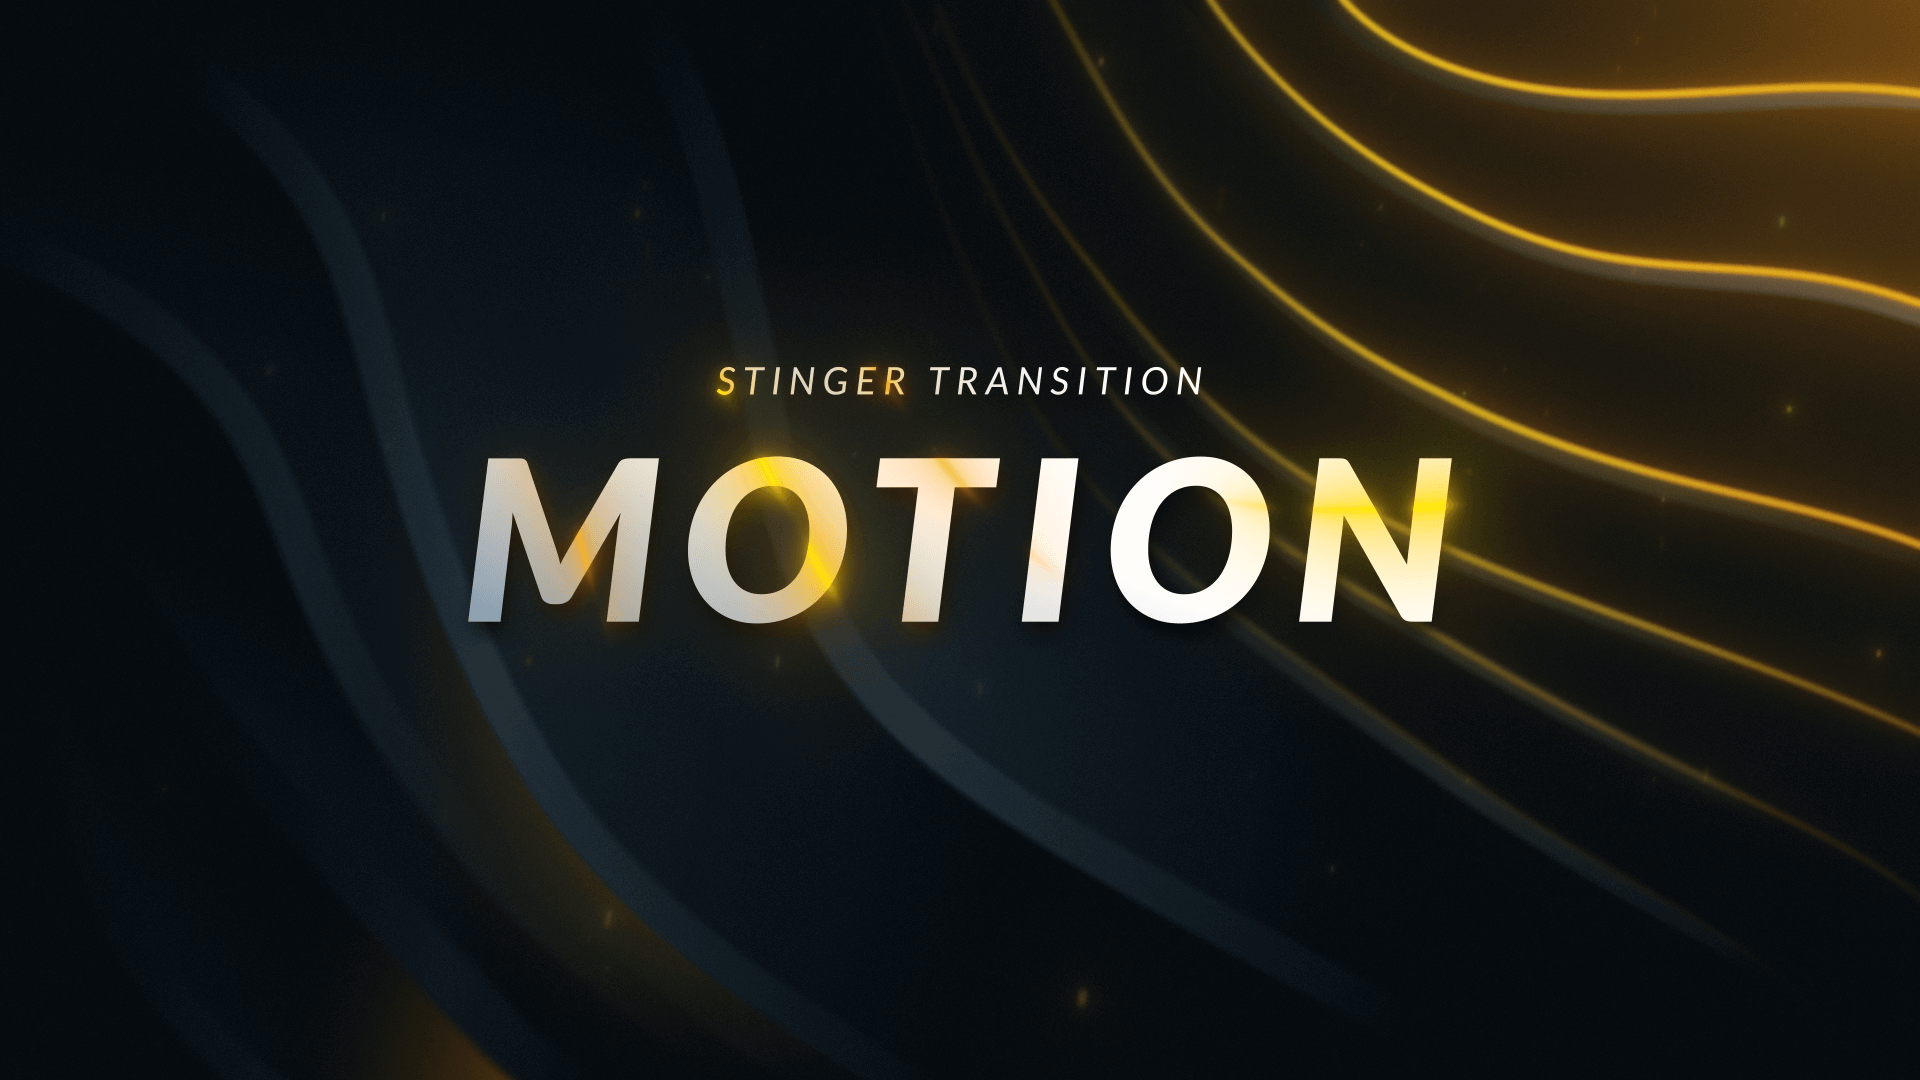 Motion Animated Stinger Transition for OBS Studio and Streamlabs